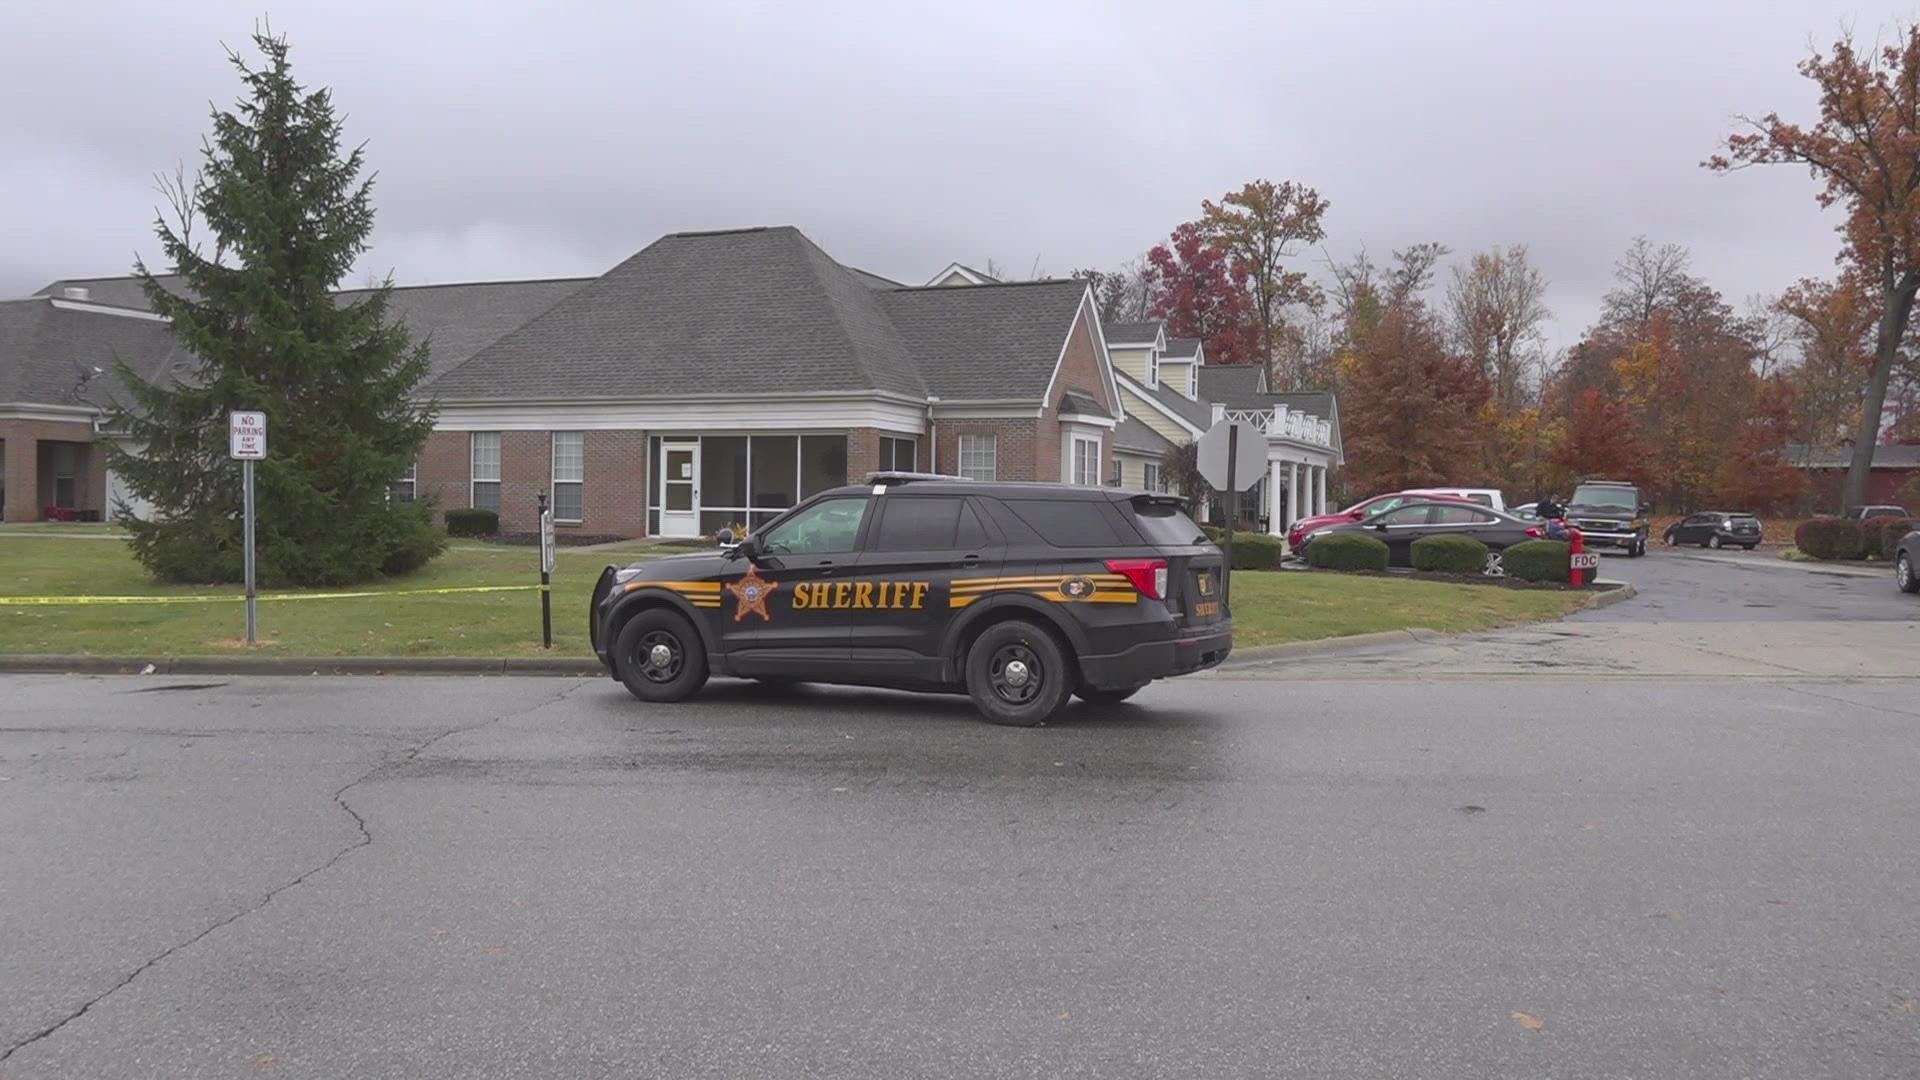 Investigators from the Delaware County Sheriff’s Office remained on scene for much of the morning Wednesday.